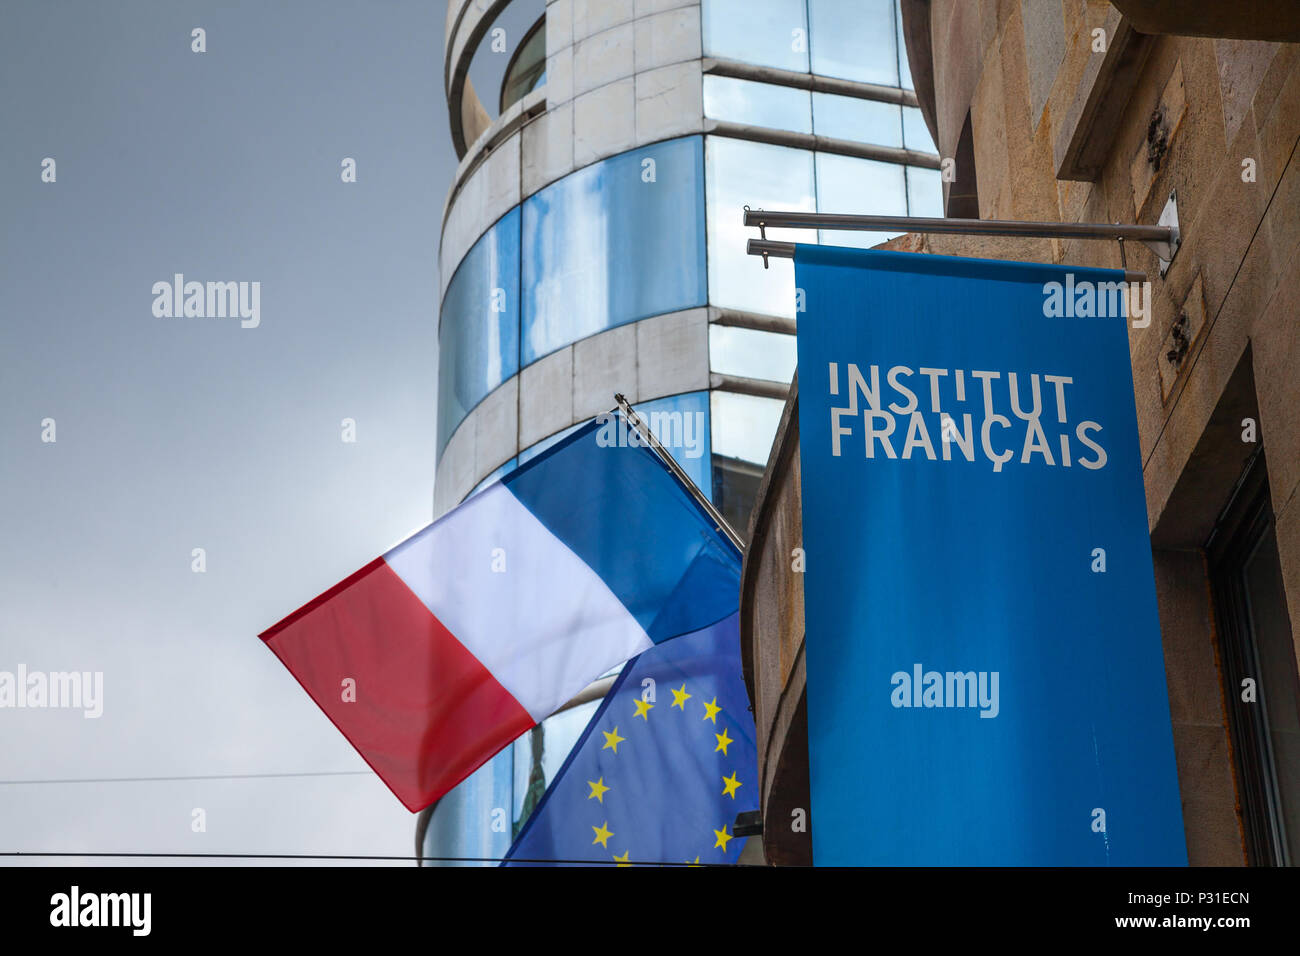 BELGRADE, SERBIA - JUNE 14, 2018: Logo of the French Institute (Institut Francais) with the French flag on their HQ for Serbia. Institut Francais is i Stock Photo